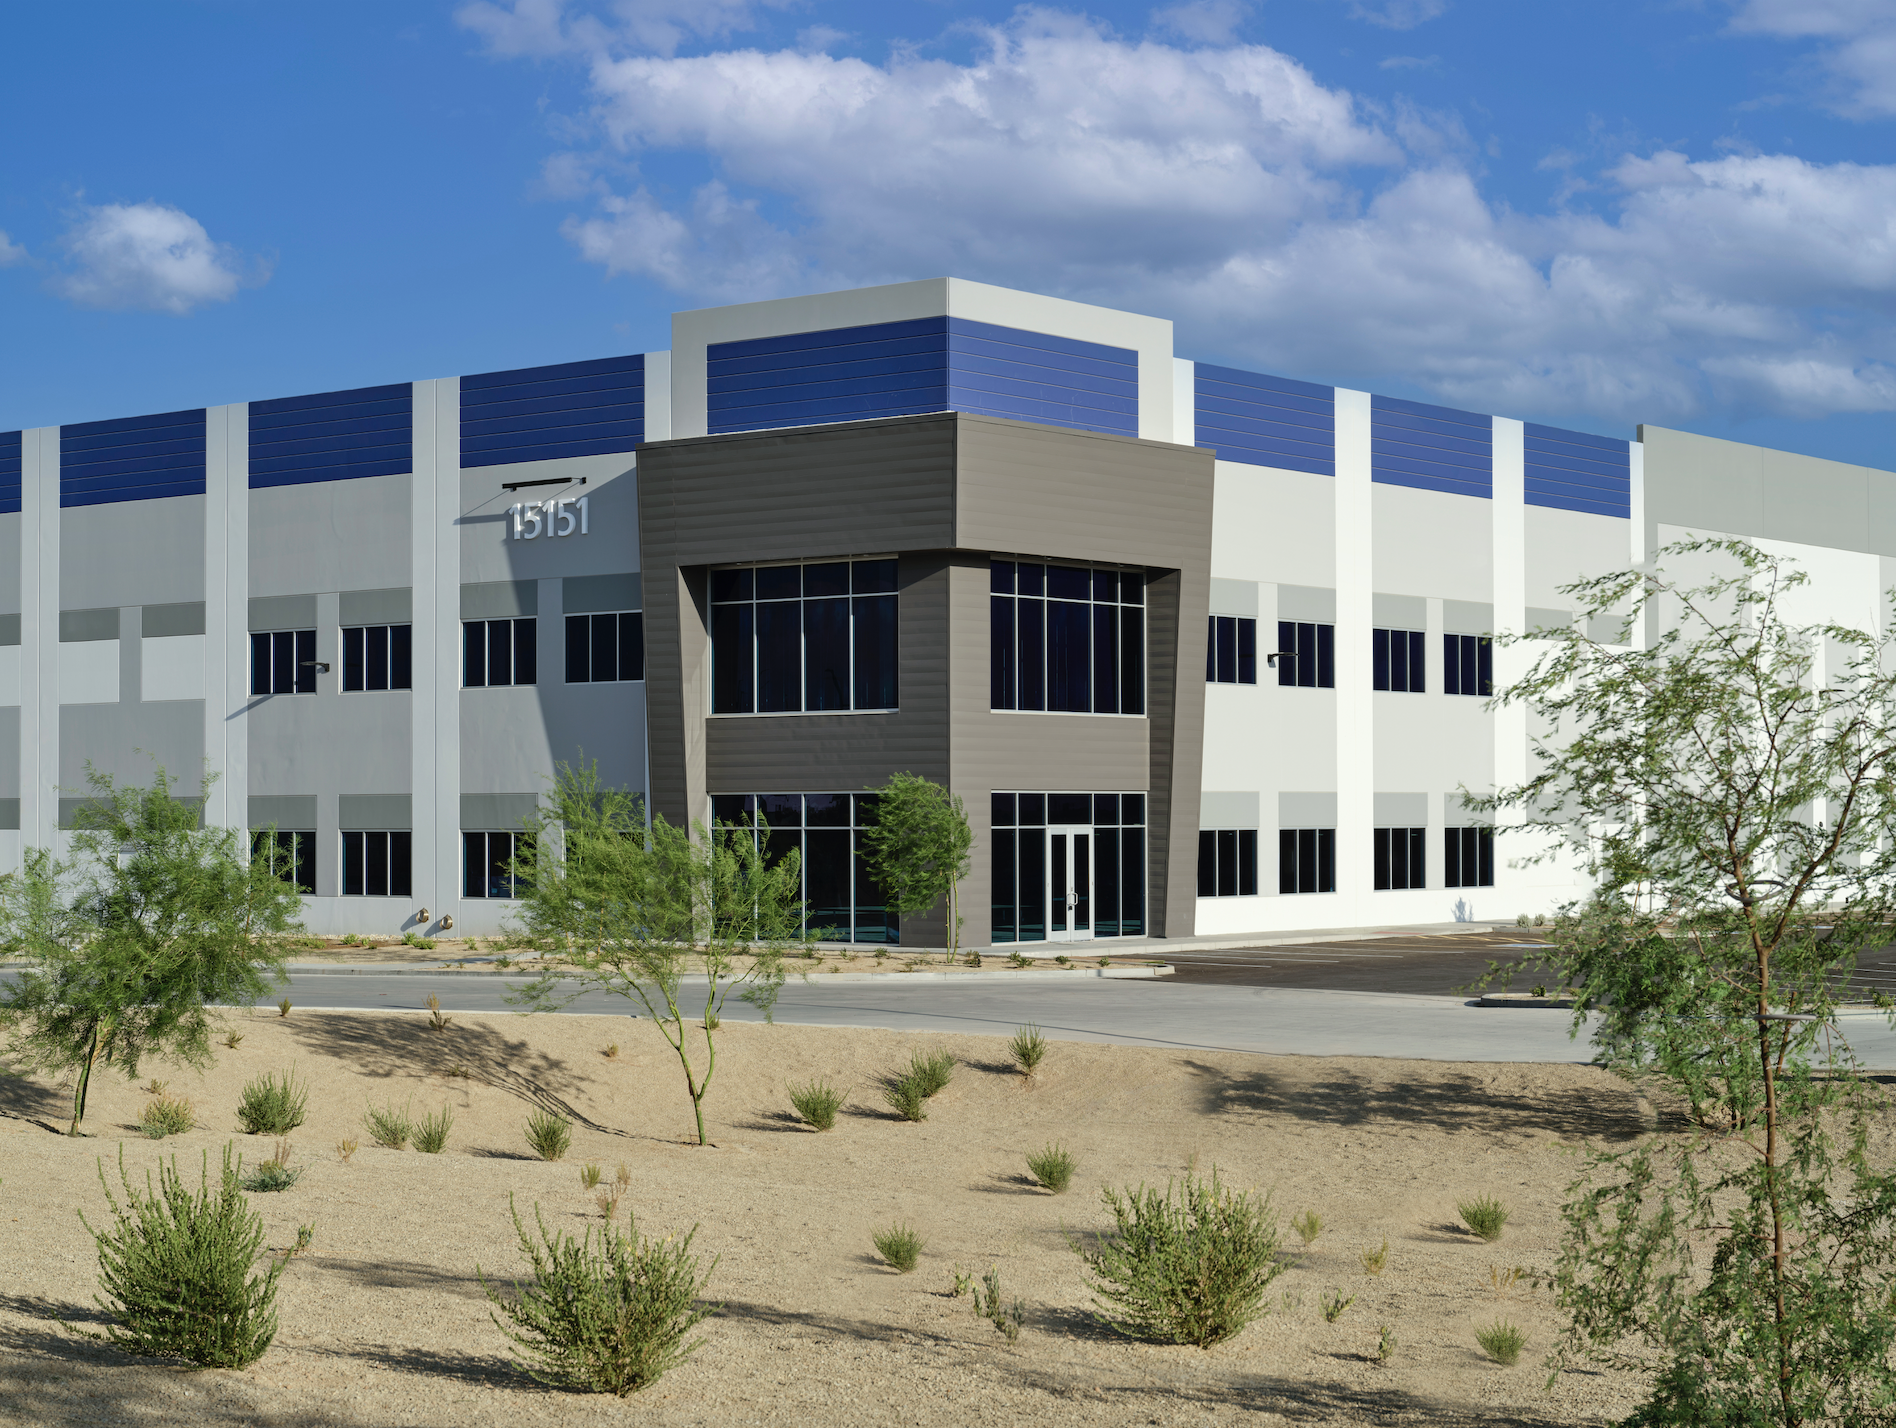 westcore-acquires-hatcher-industrial-park-in-forward-purchase